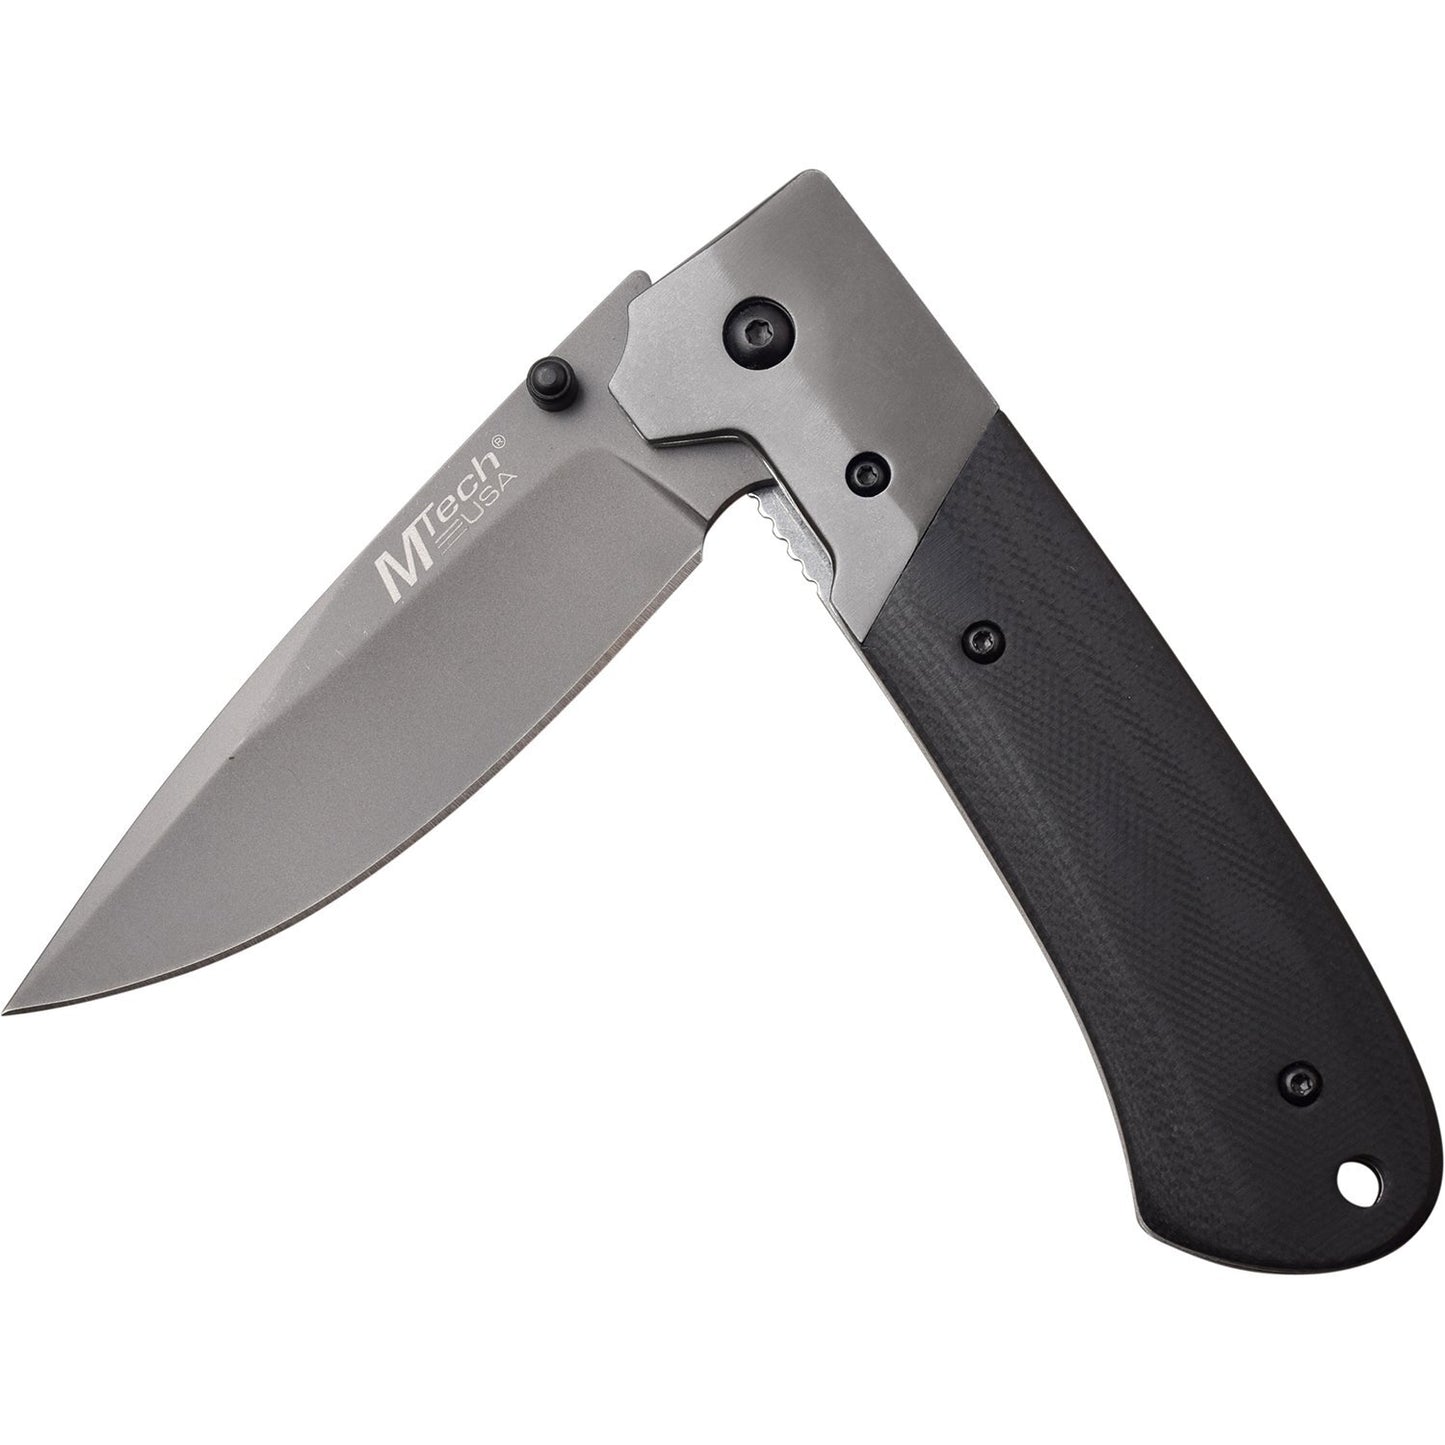 Mtech Mtech Drop Point Hunting Folding Knife - Gray Smooth G10 Handle #mt-1067Gy Dark Gray